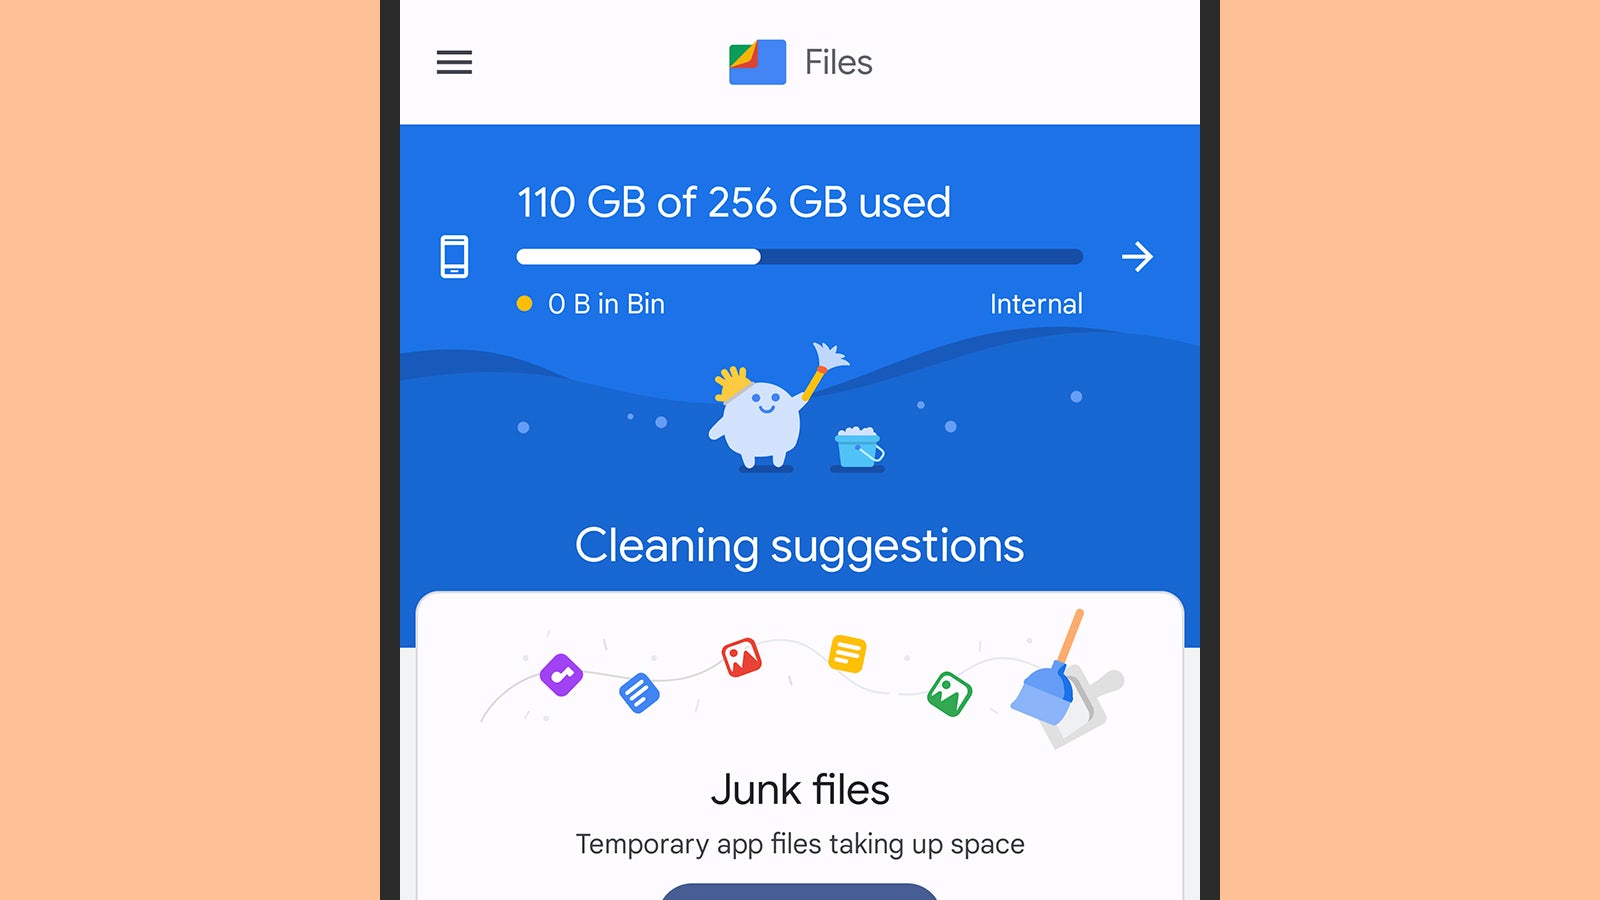 You'll get plenty of suggestions for cleaning up files. (Screenshot: Google Files)